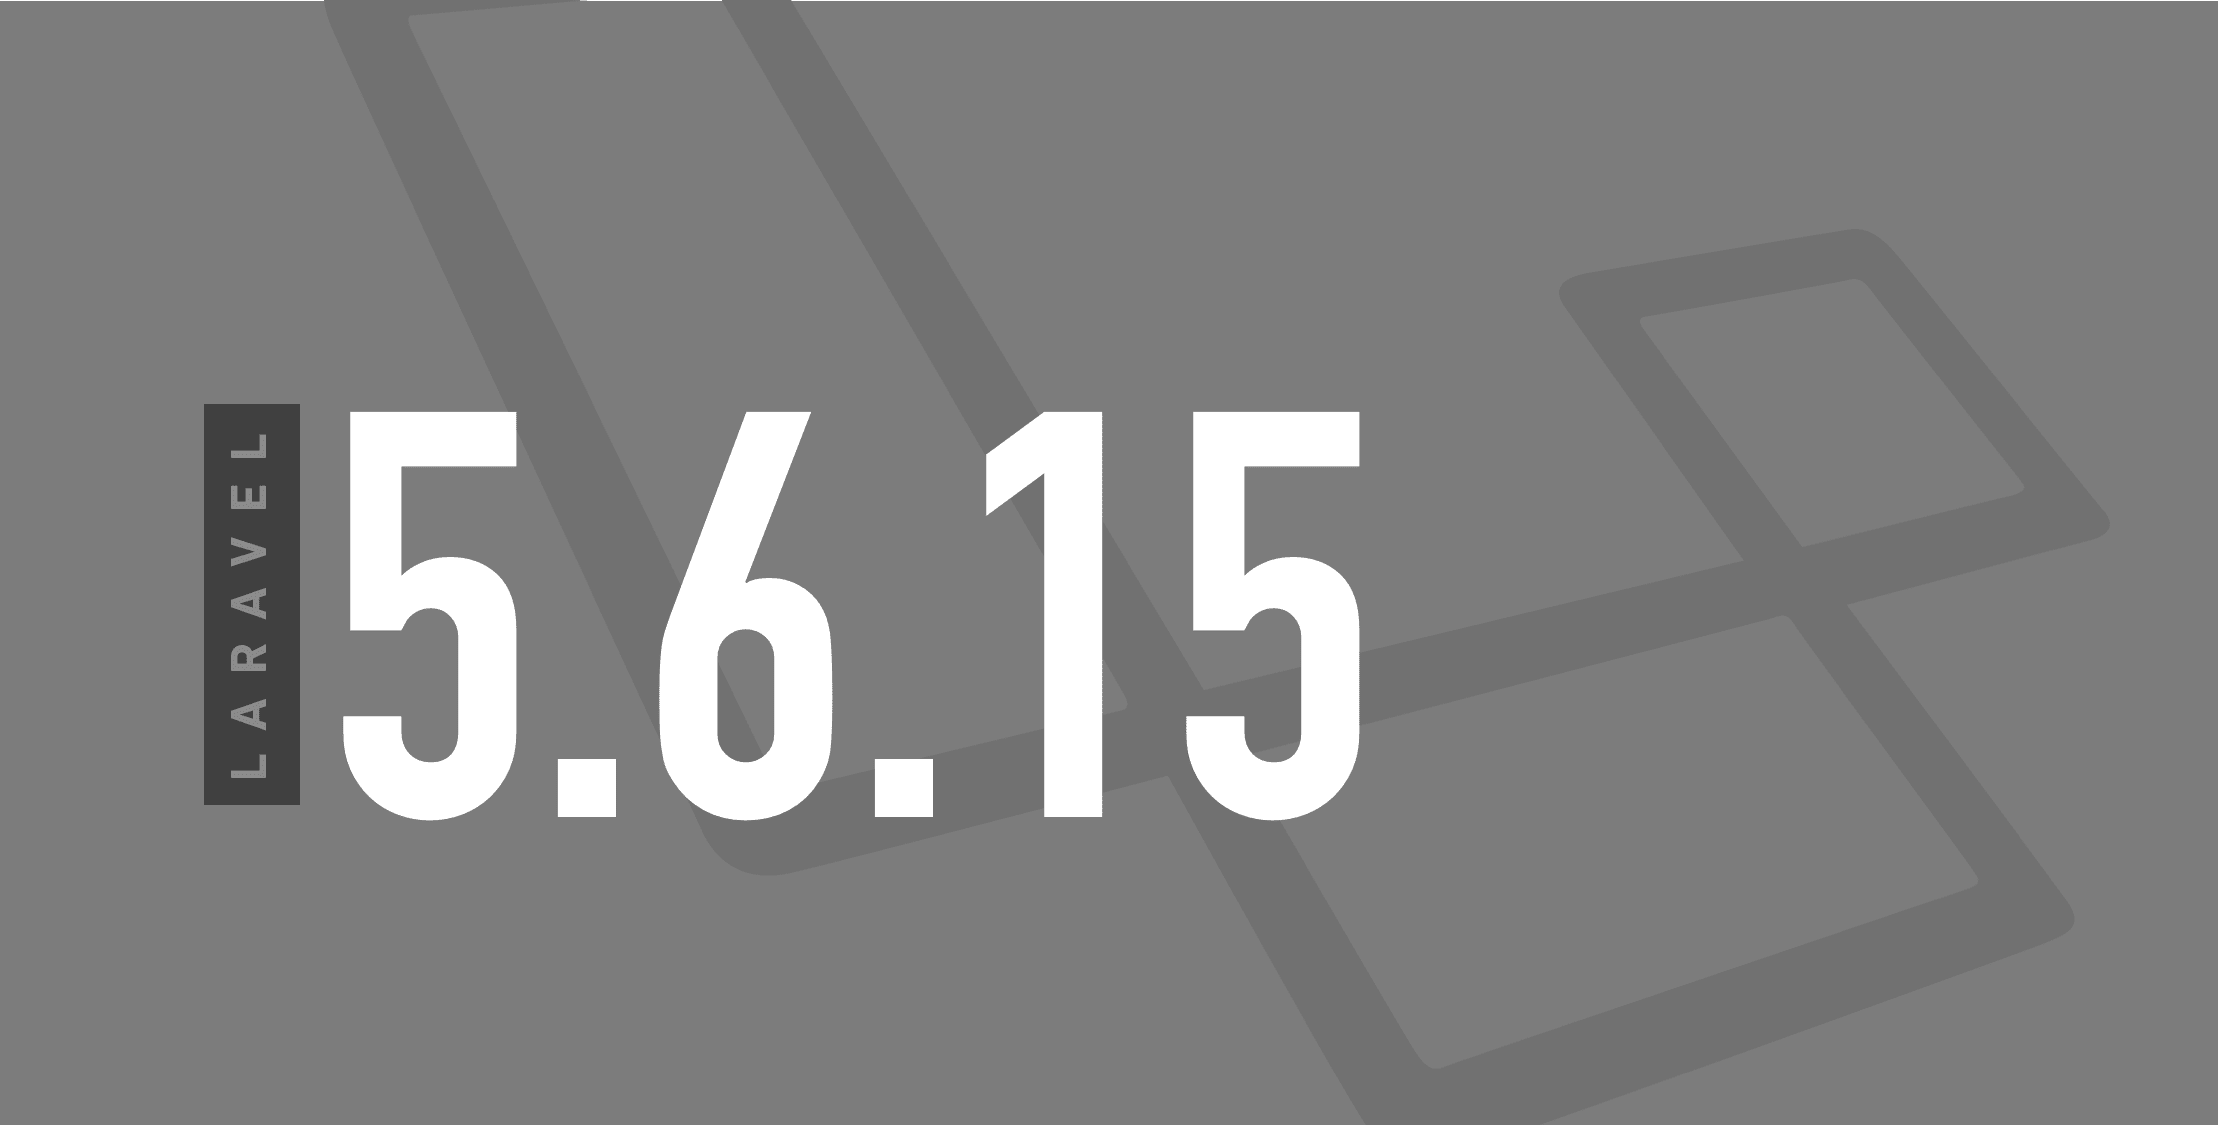 Laravel 5.6.15 and 5.5.40 is released with a security patch image